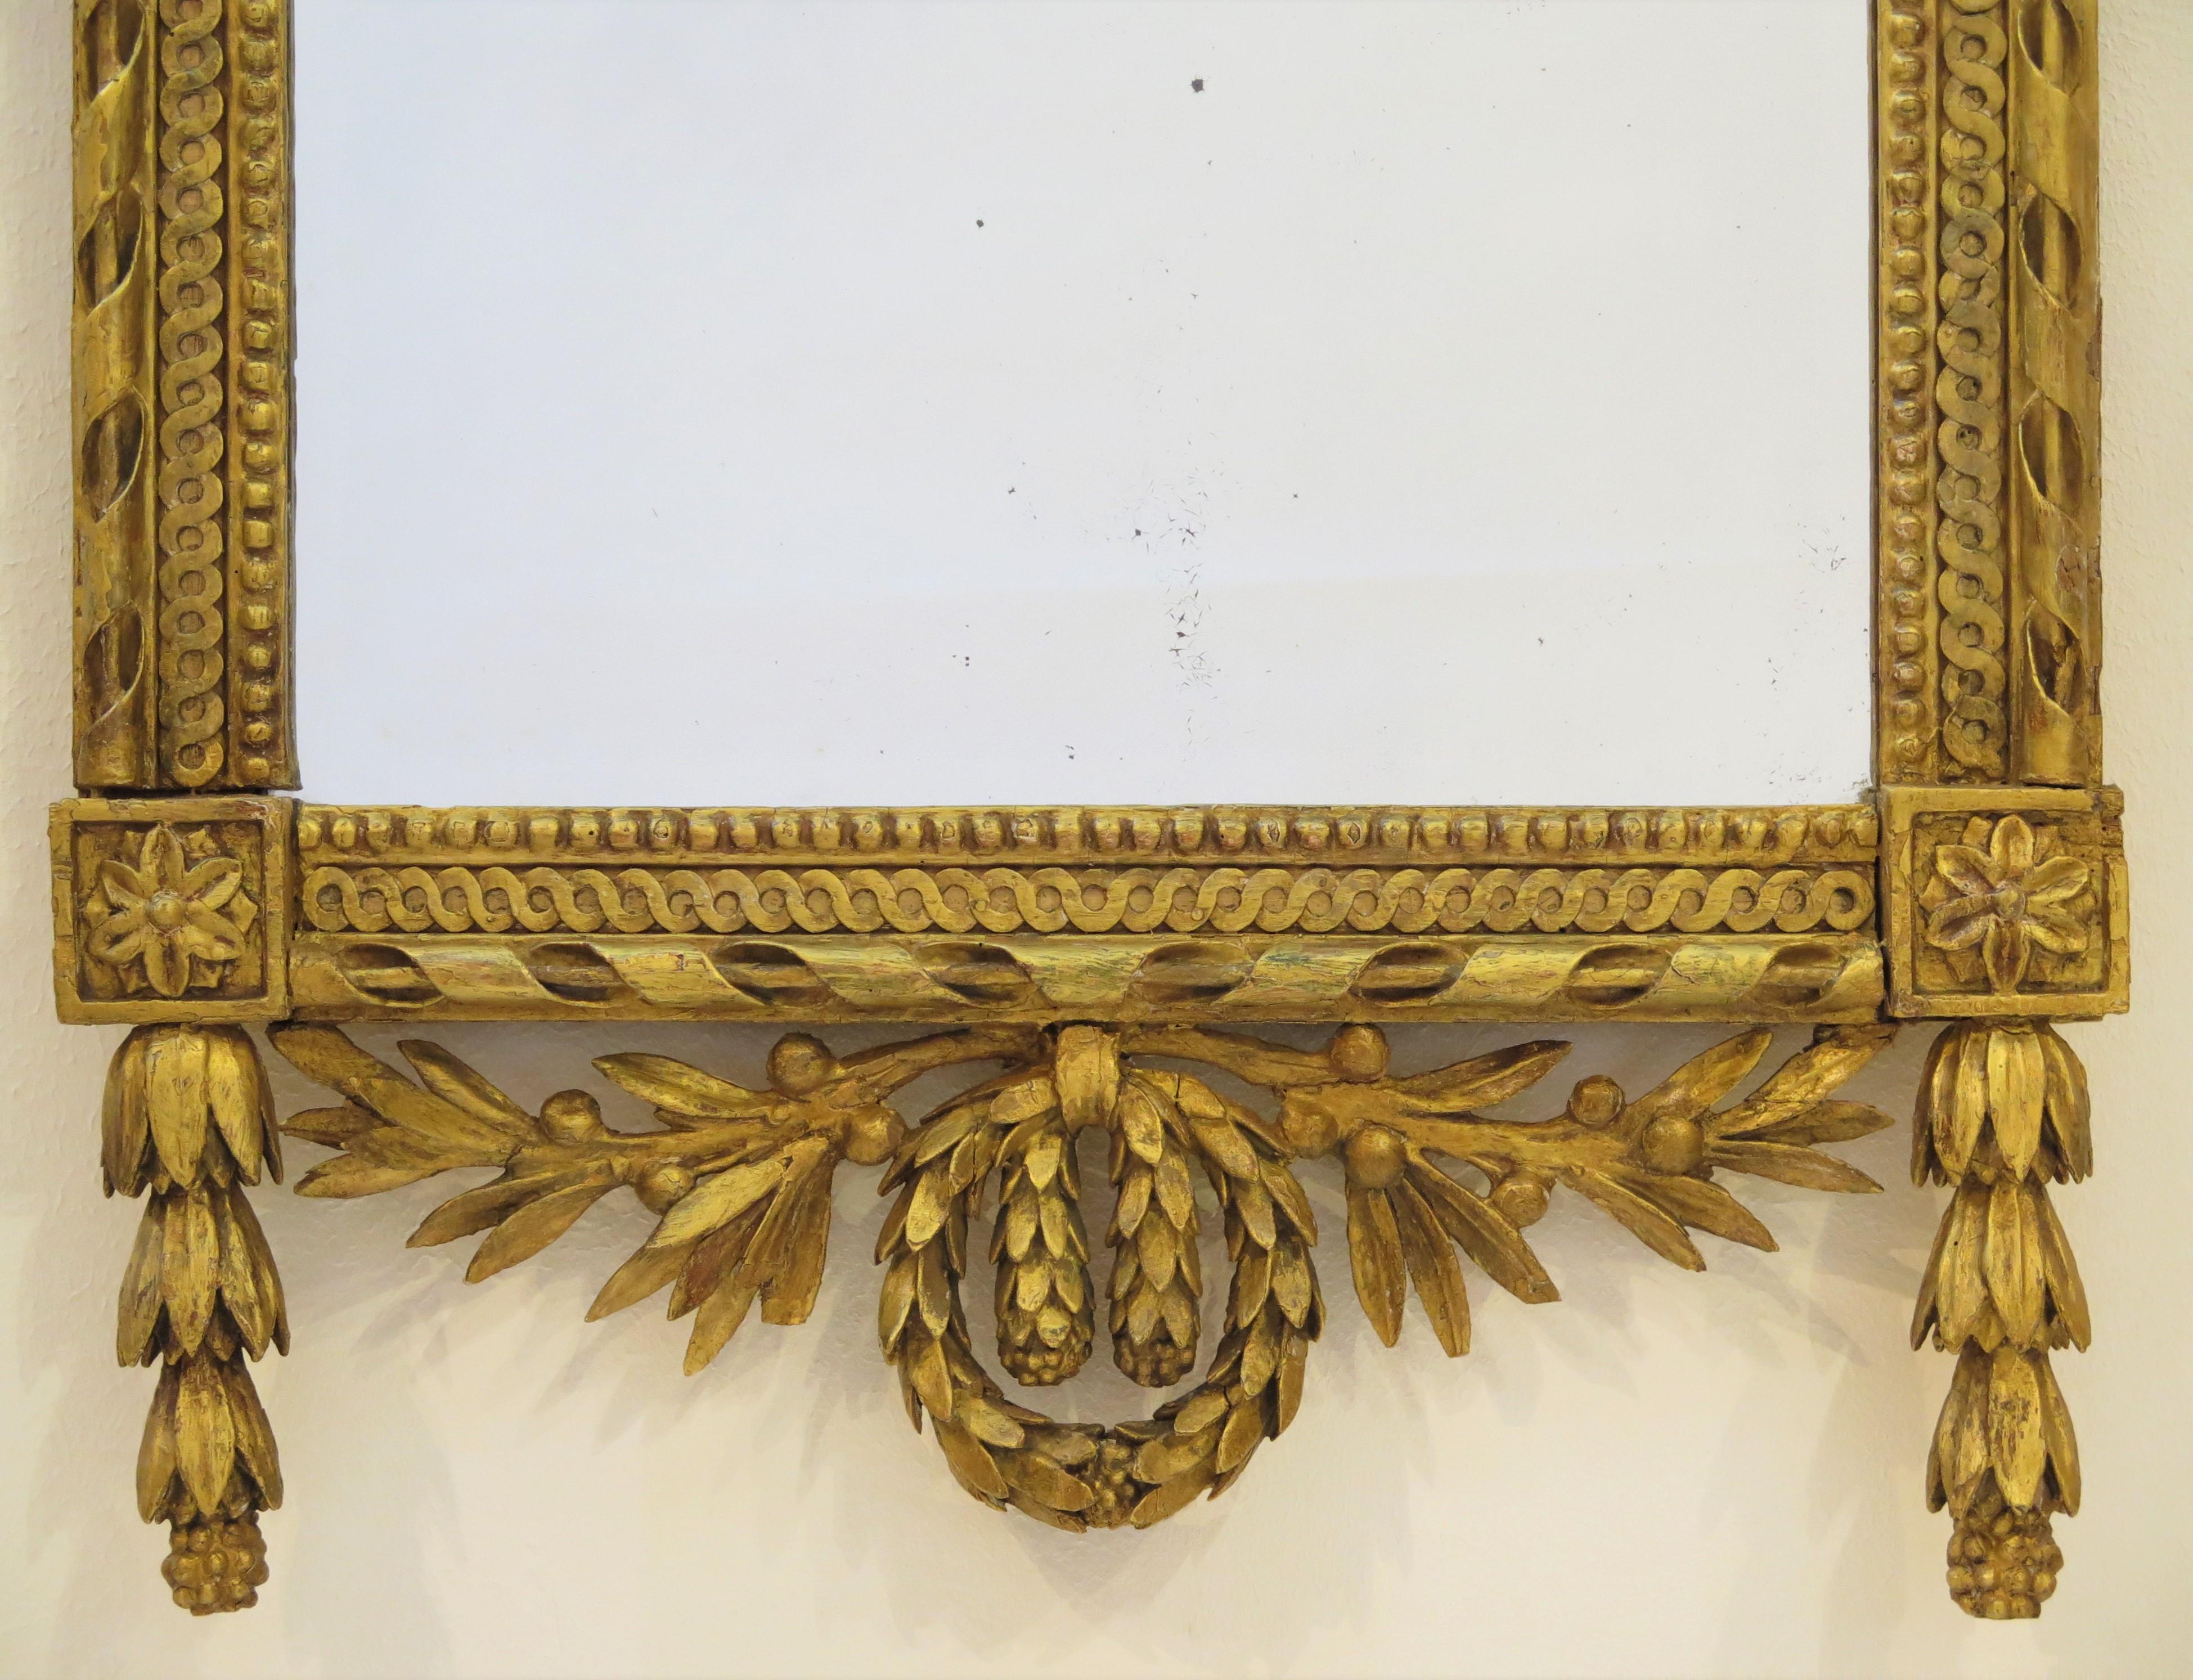 Hand-Carved Italian Neoclassical Pier Glass, Circa 1770 For Sale